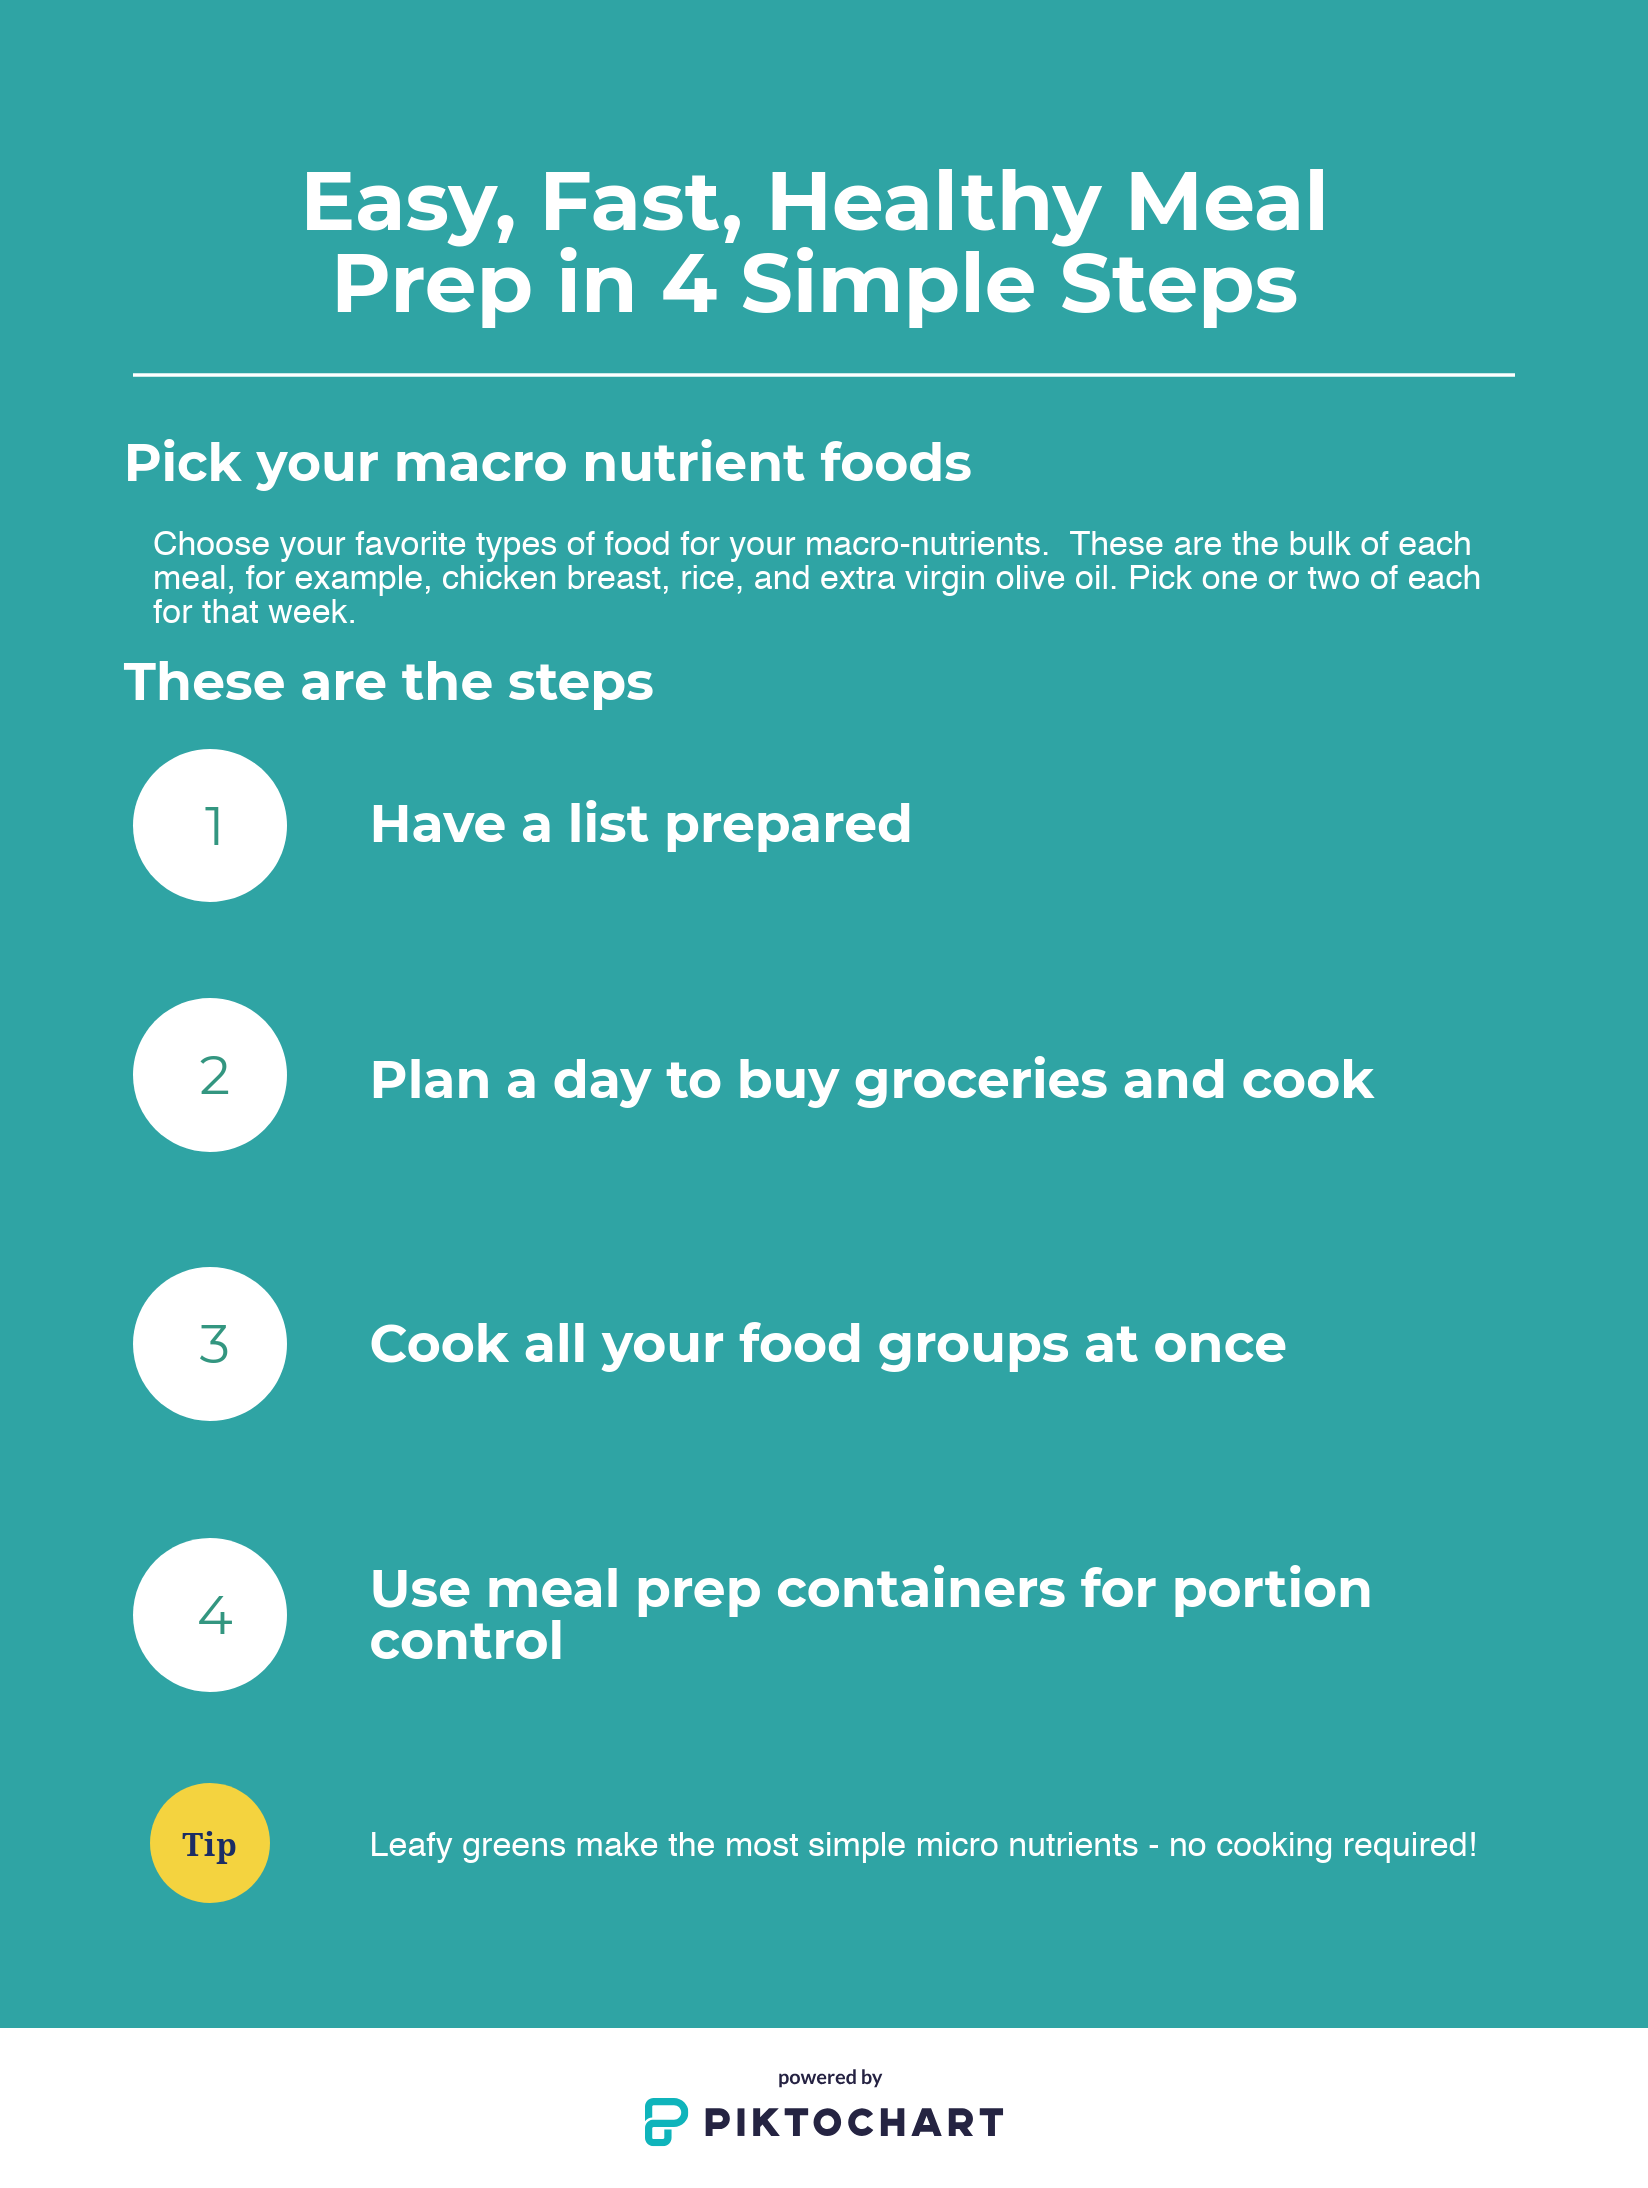 Are you busy but want a fast way to have healthy meals on hand? This is the perfect guide for you. Repin and click this post on HOW TO meal prep for the week in four simple steps. Take out complication, stay on track with nutrition, and lose weight with this simple plan.  BONUS: Free grocery list download